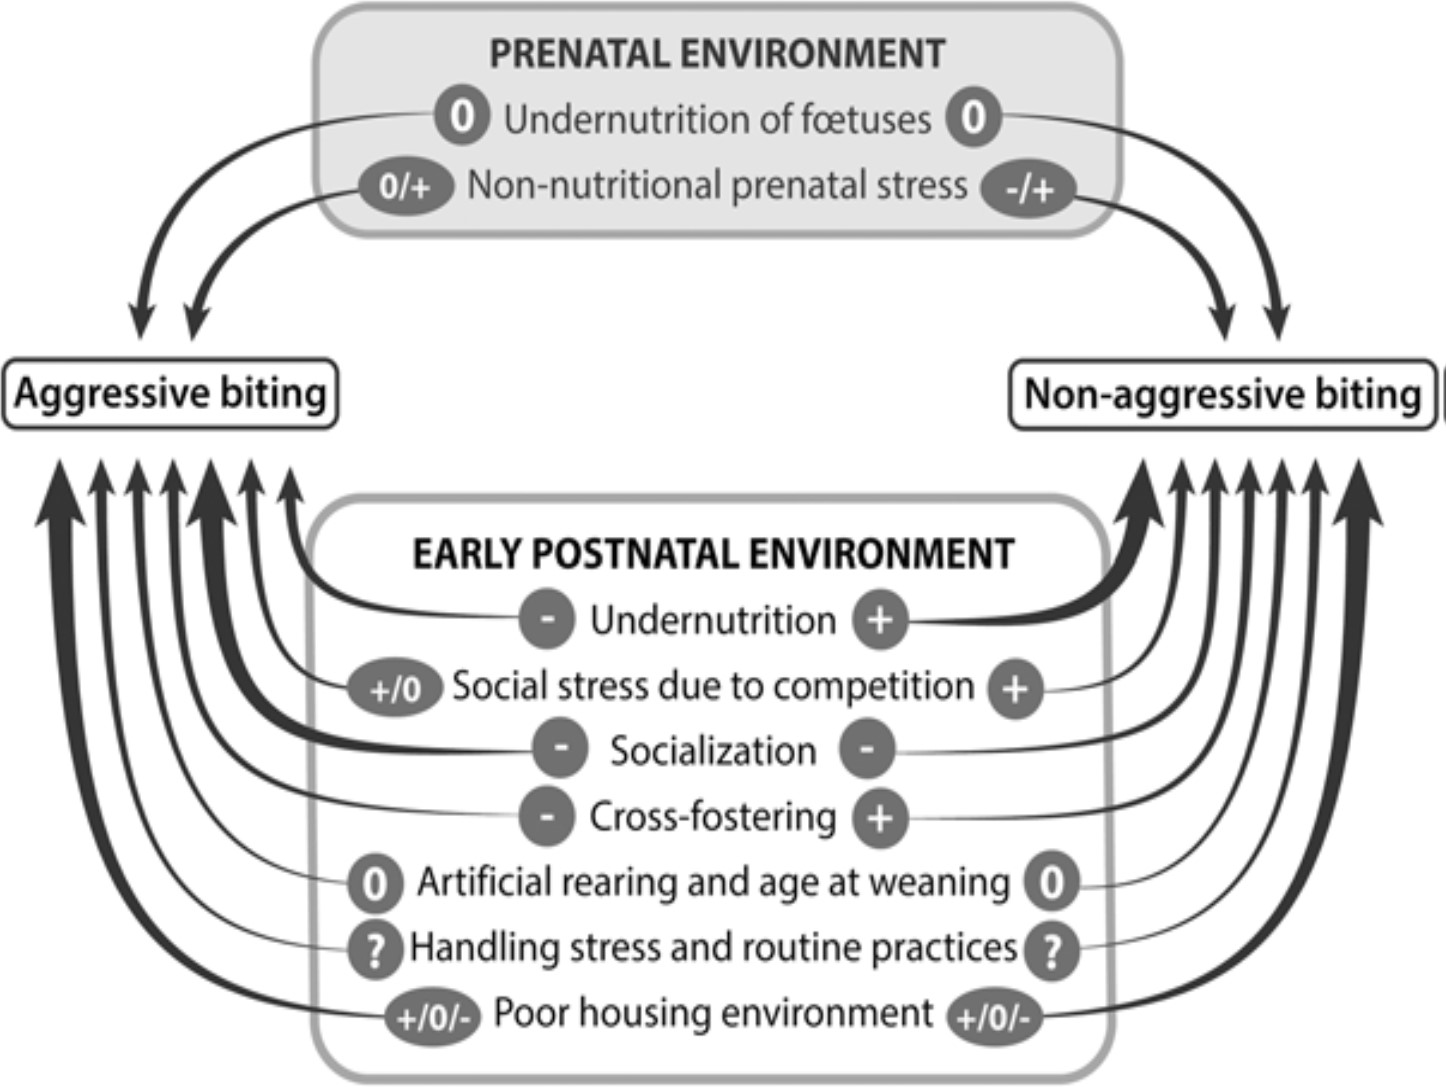 Diagram showing the influence that pigs’ prenatal and pre-weaning environment has on the occurrence of biting behaviour later in life